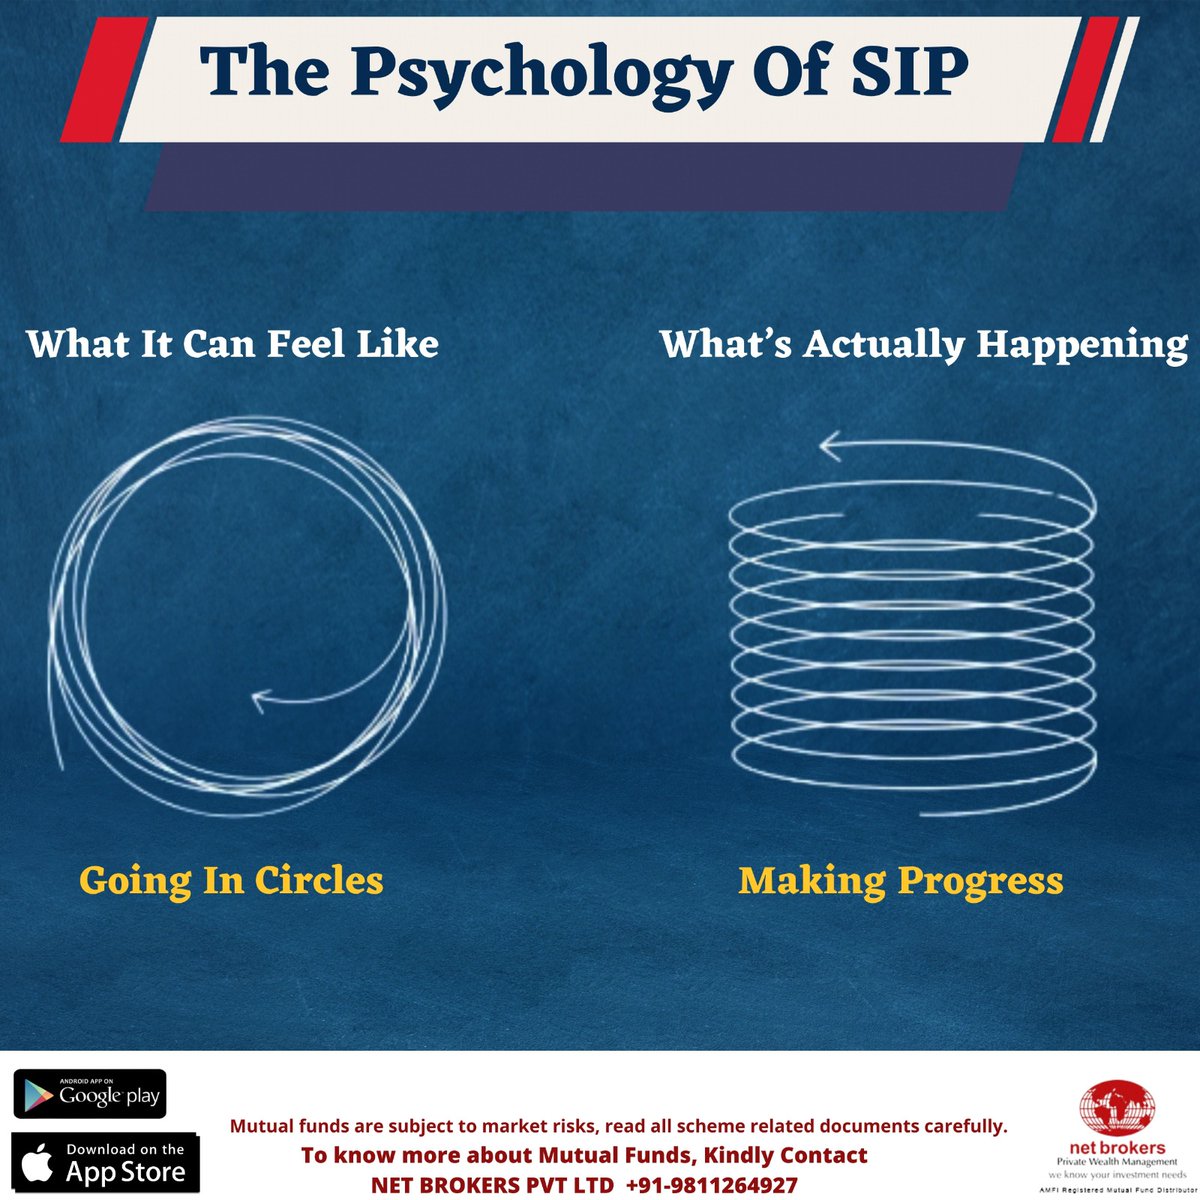 SIP: Feels like going in circles, but it's compound progress in disguise!

Small, consistent steps every month add up to significant financial growth over time. Embrace the power of compounding and watch your investments steadily rise.

#sip #mutualfundsahihai #mutualfunds